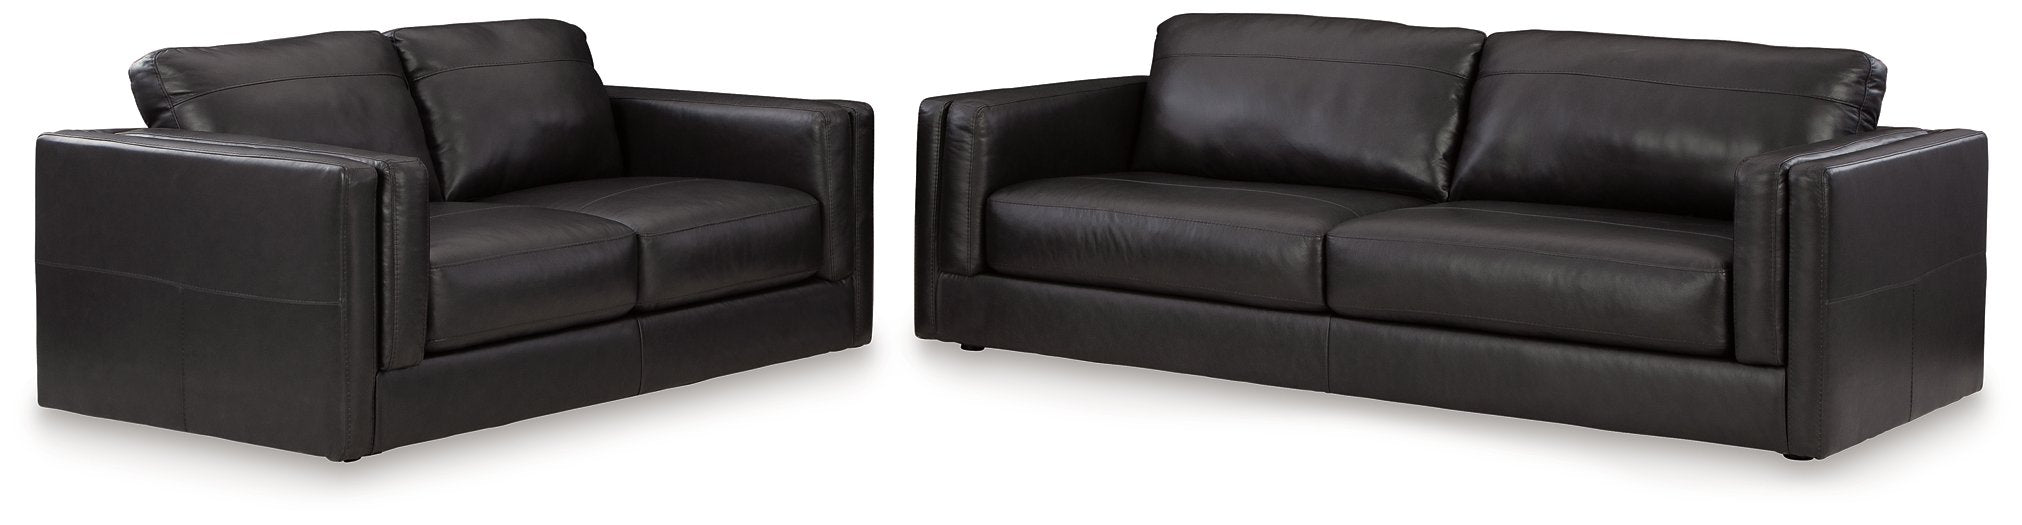 Amiata 2-Piece Upholstery Package Living Room Set Ashley Furniture